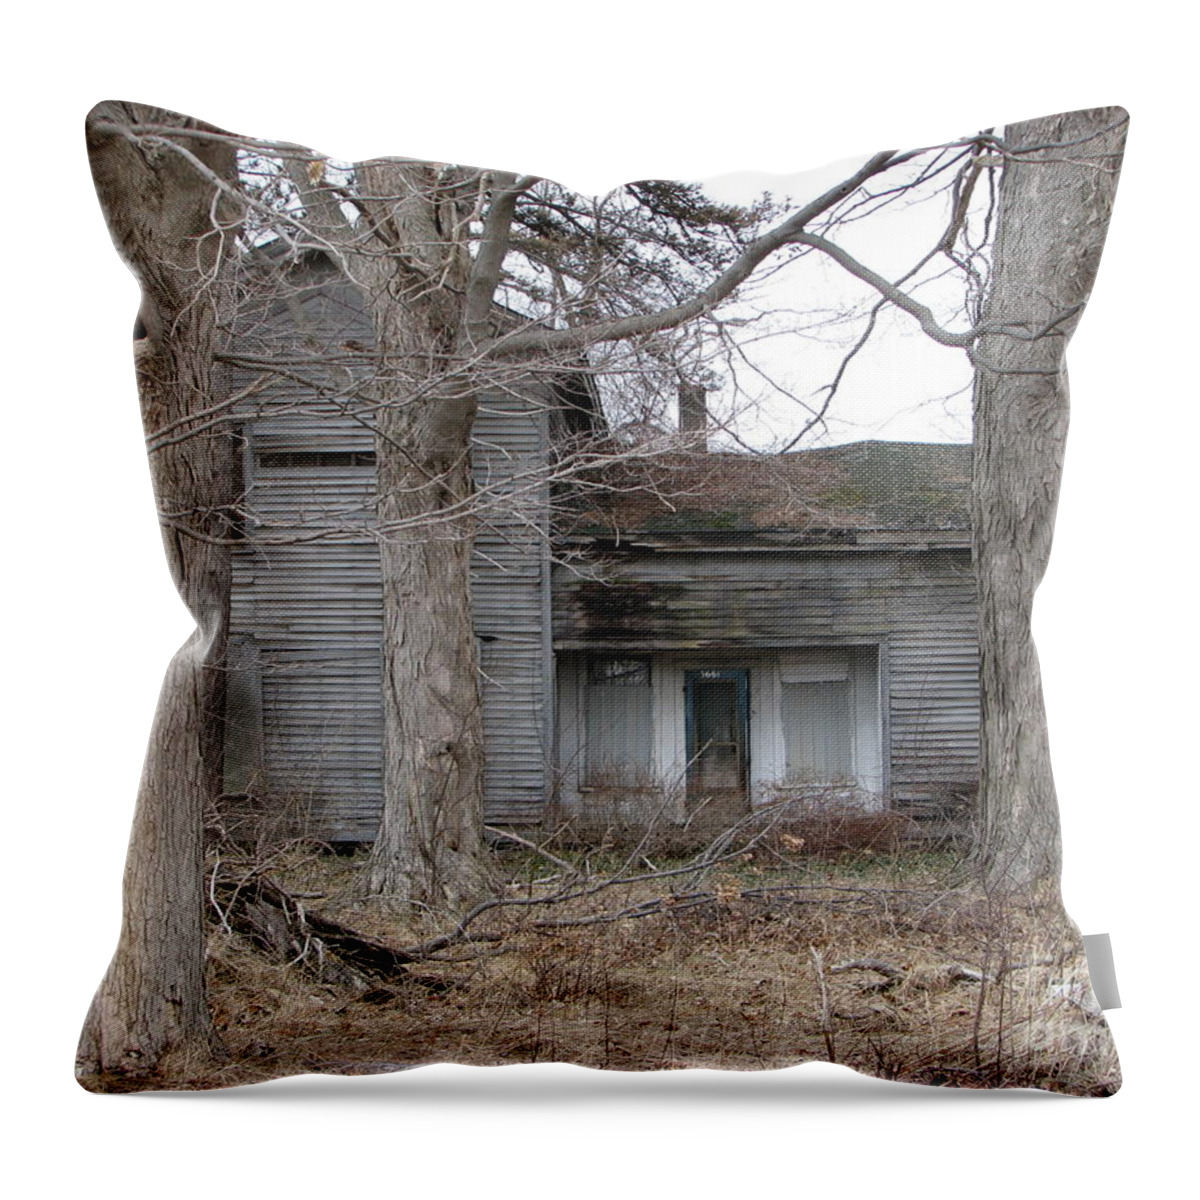 Defunct House Throw Pillow featuring the photograph Defunct House by Michael Krek